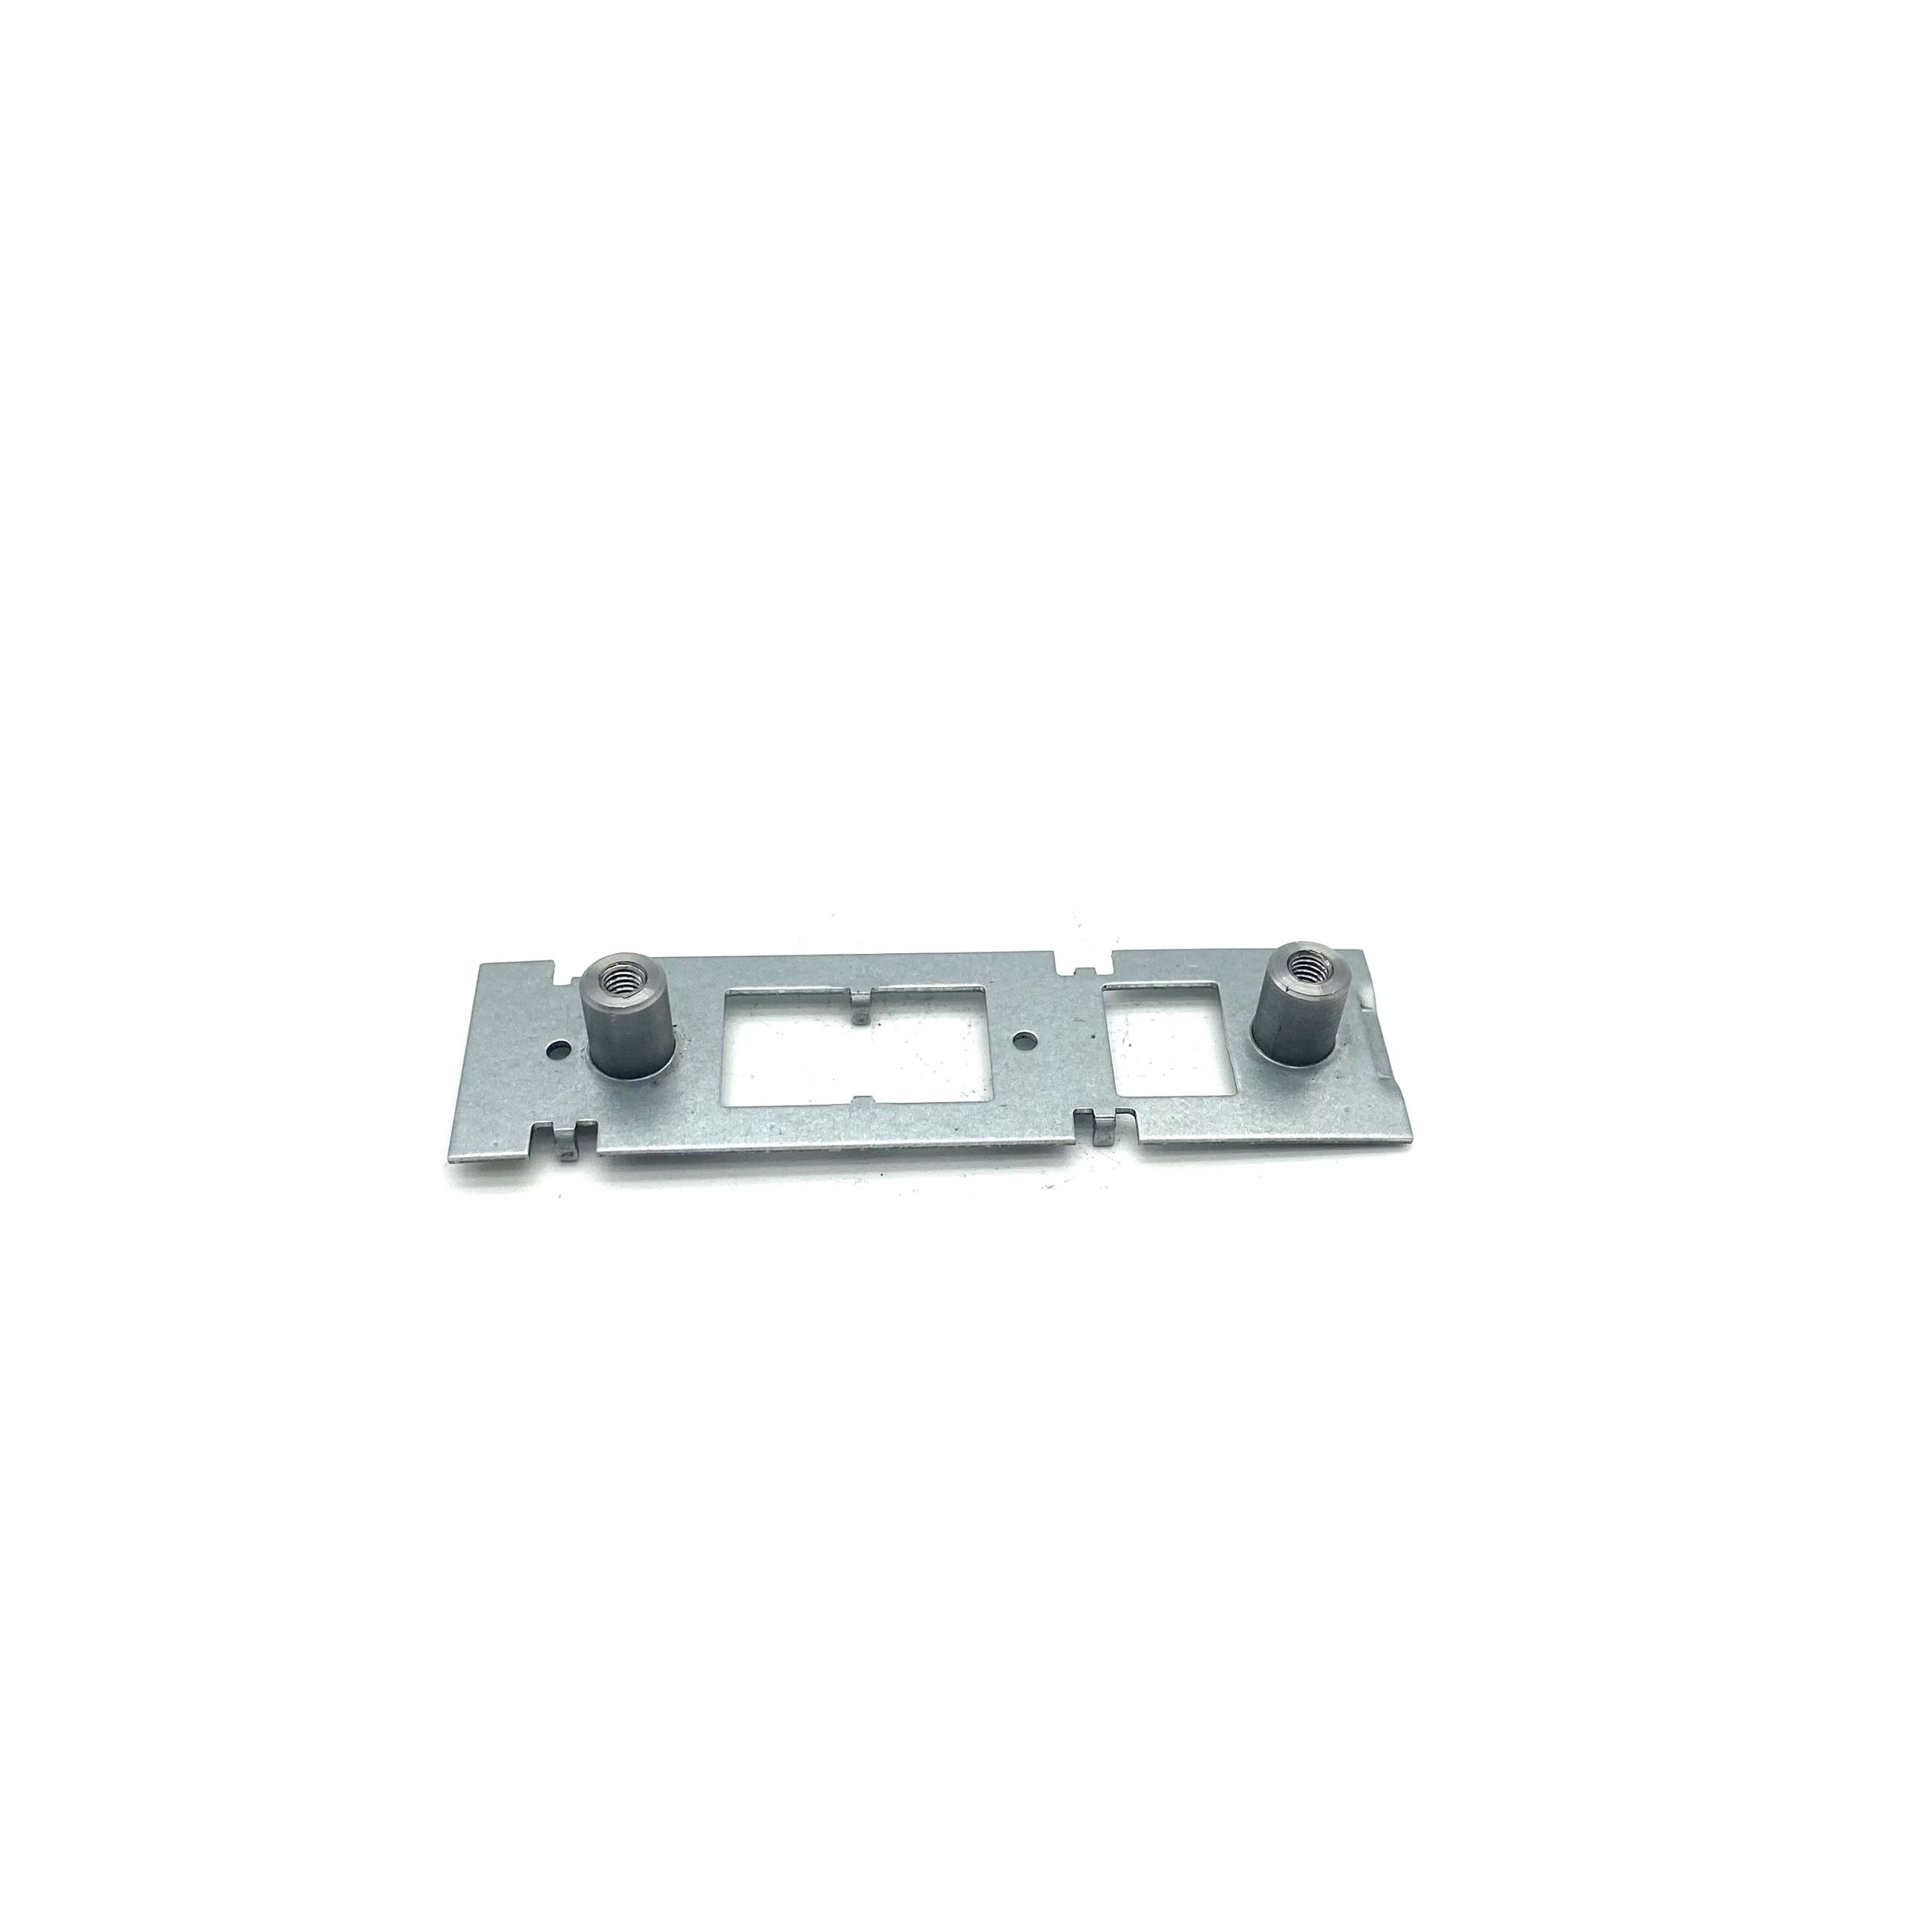 aluminum mounting bracket stamped with rivet nuts